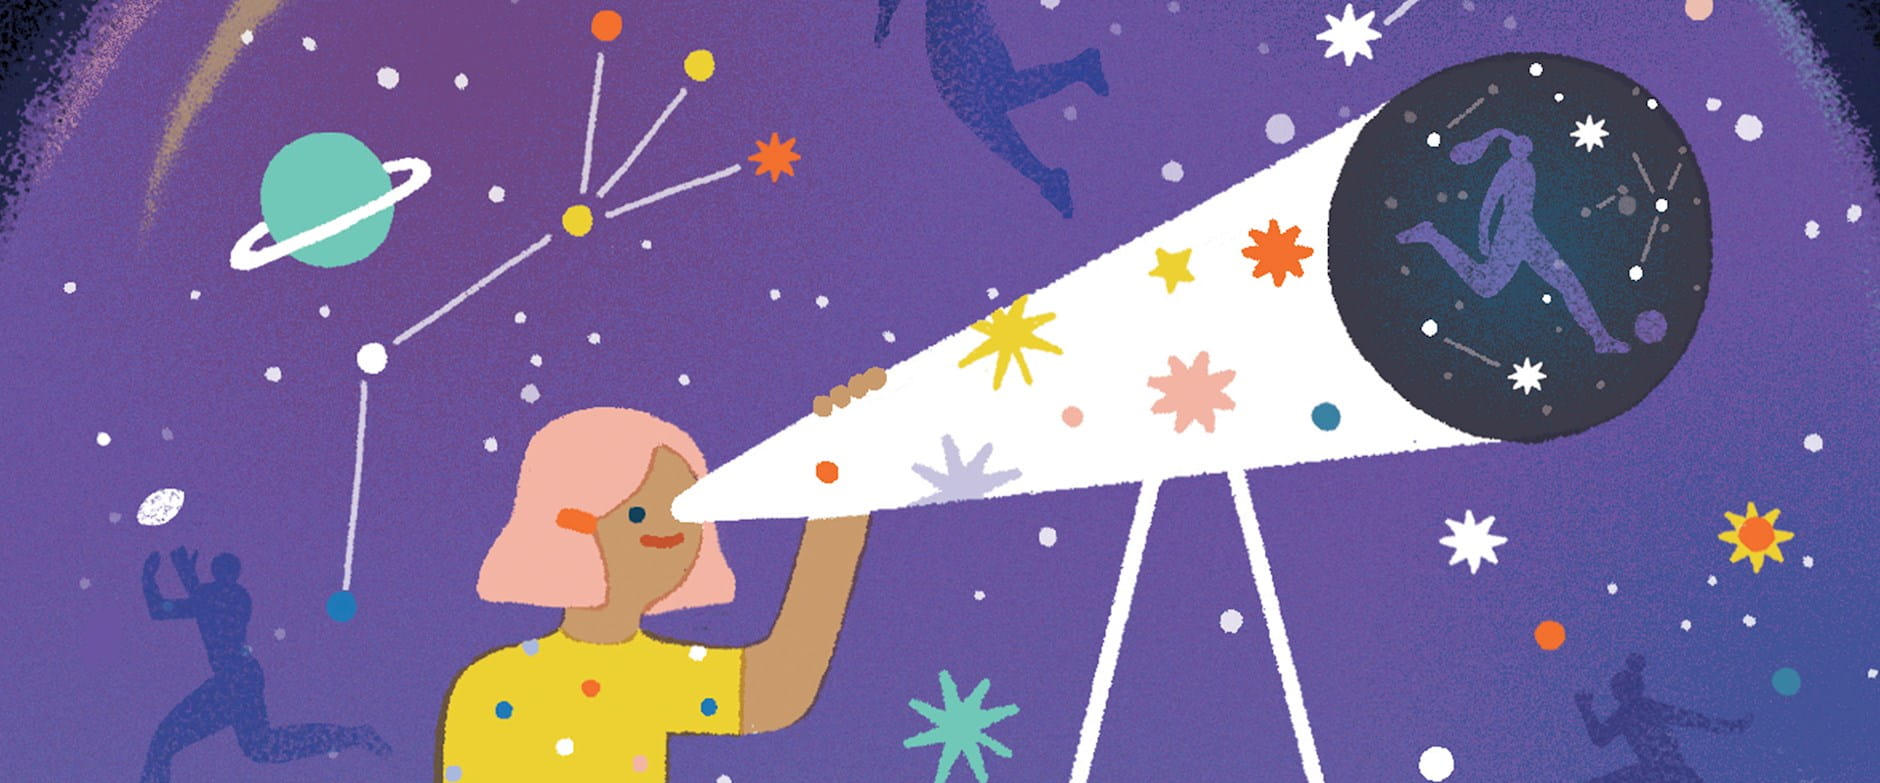 Illustration of a girl looking through a telescope seeing sports player in stars